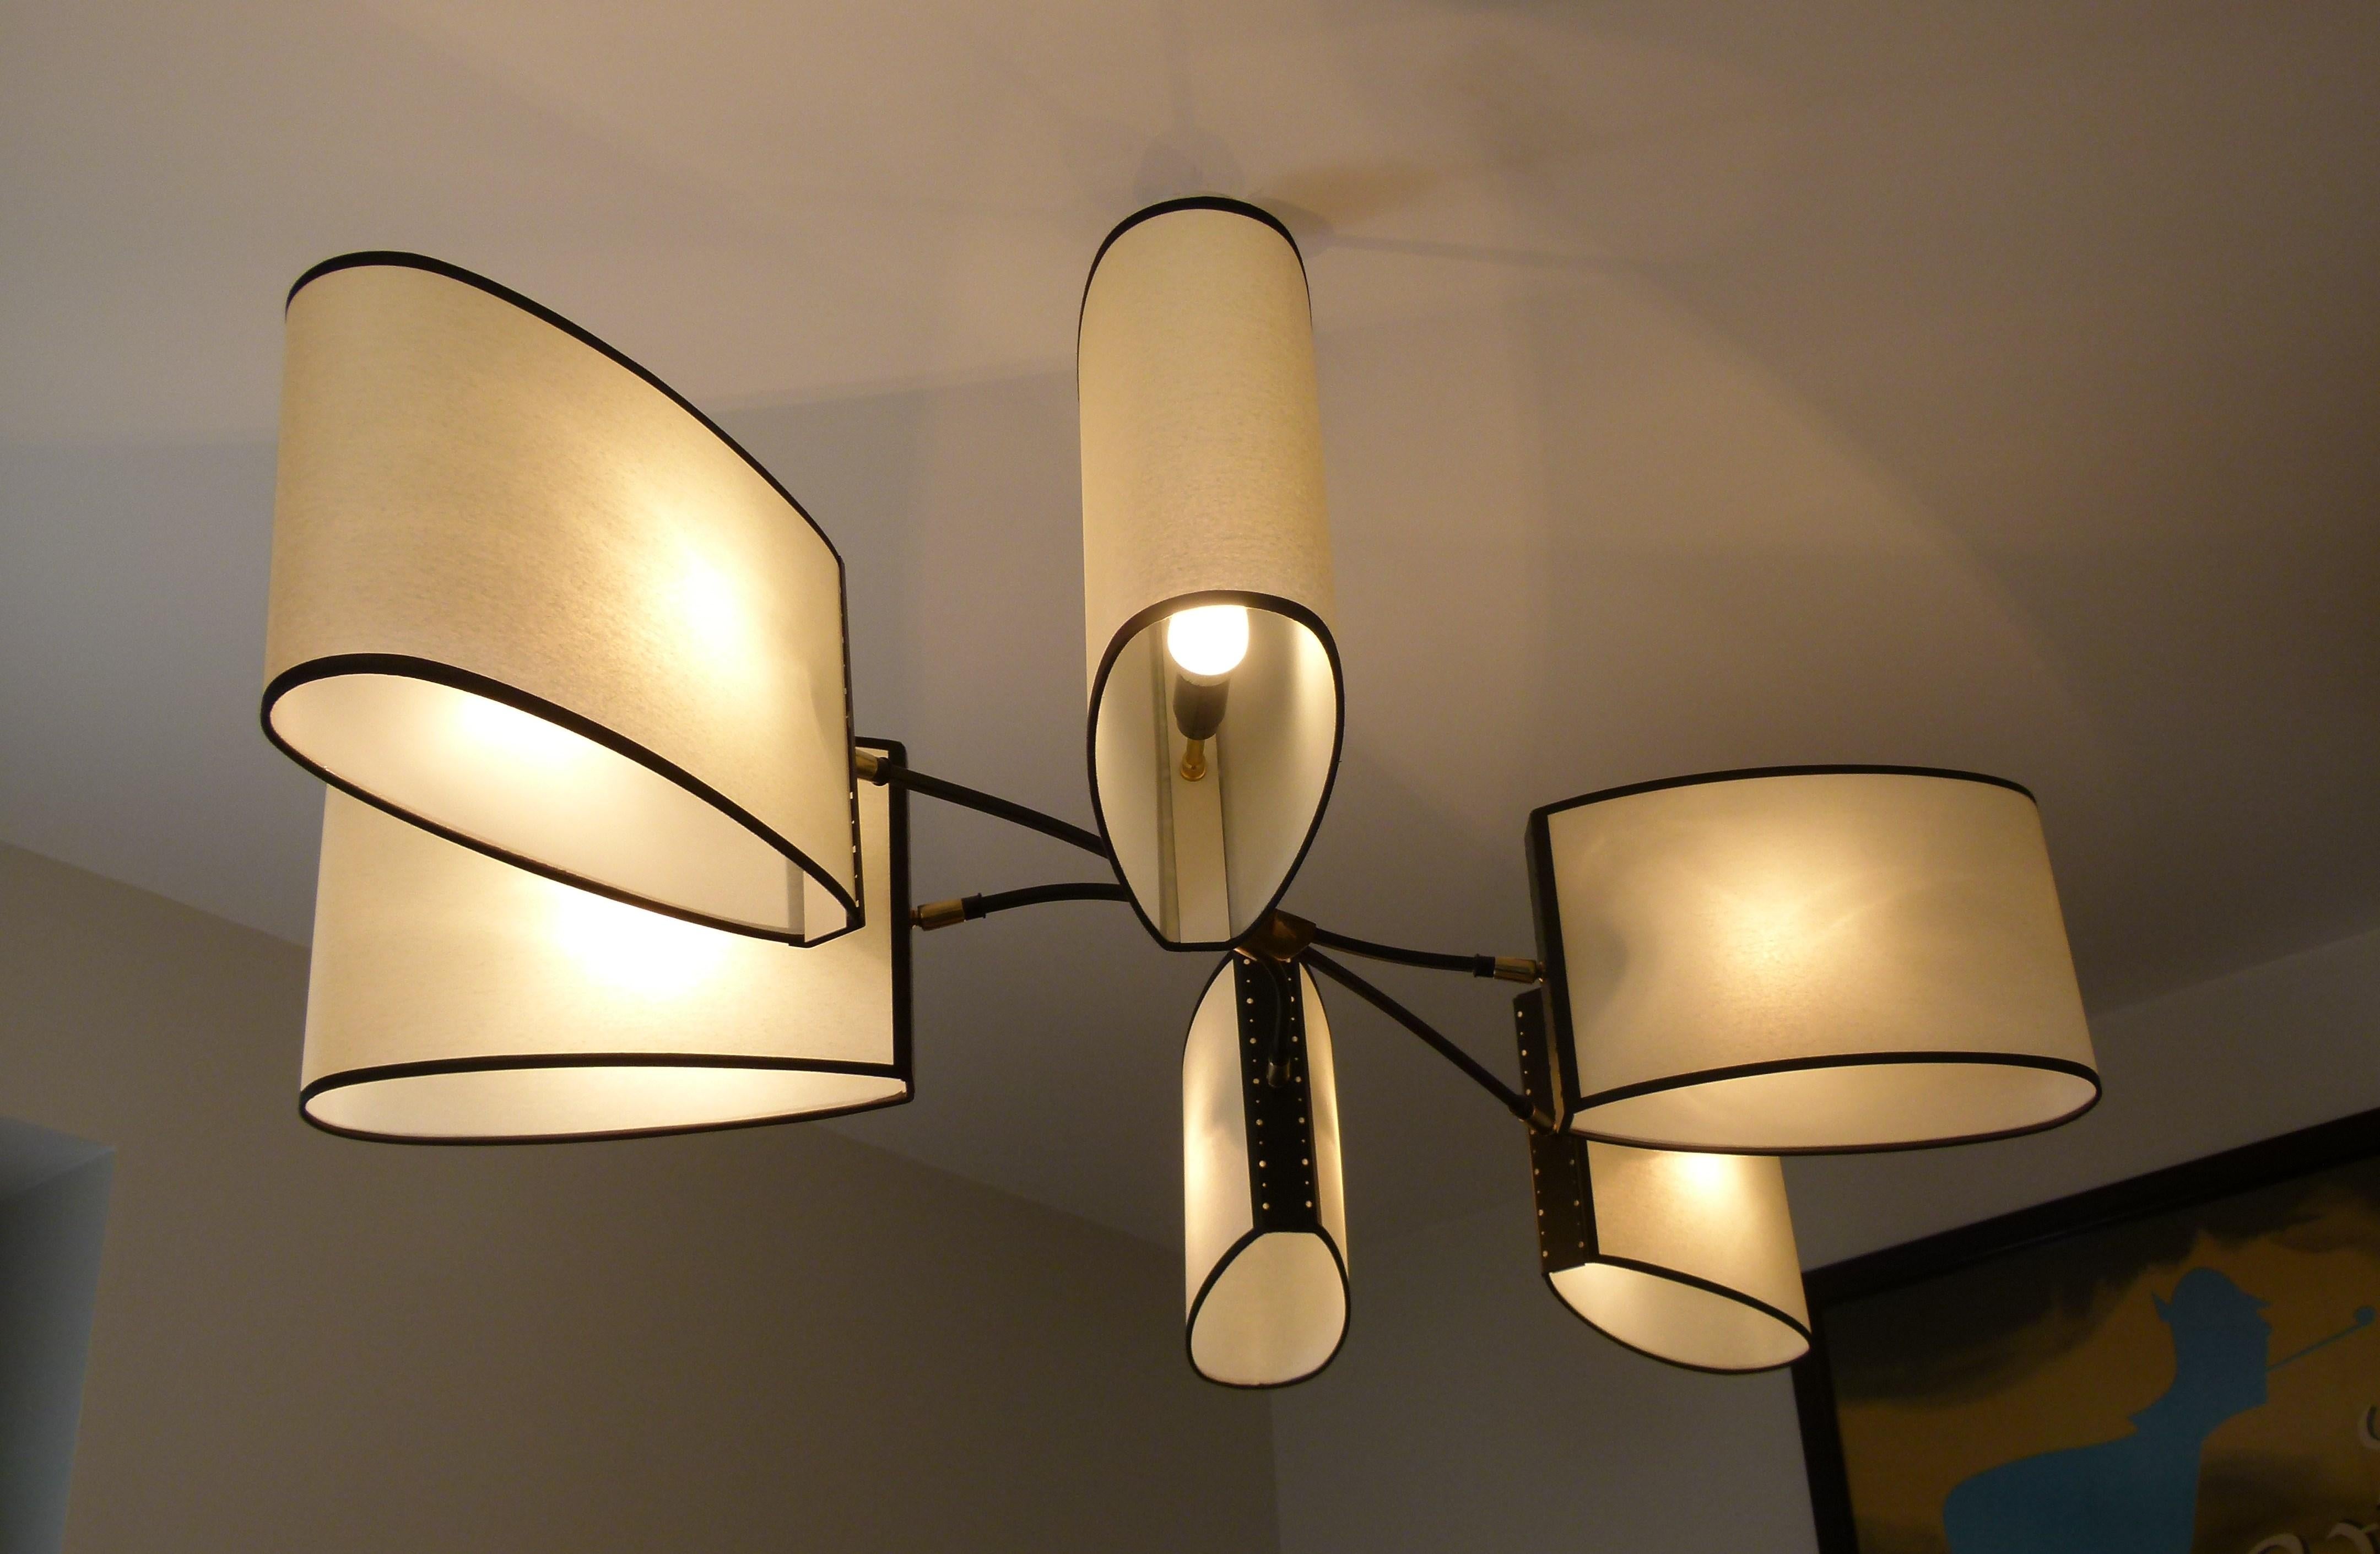 French Asymmetrical chandelier with six lighted arms by Maison Lunel, circa 1950